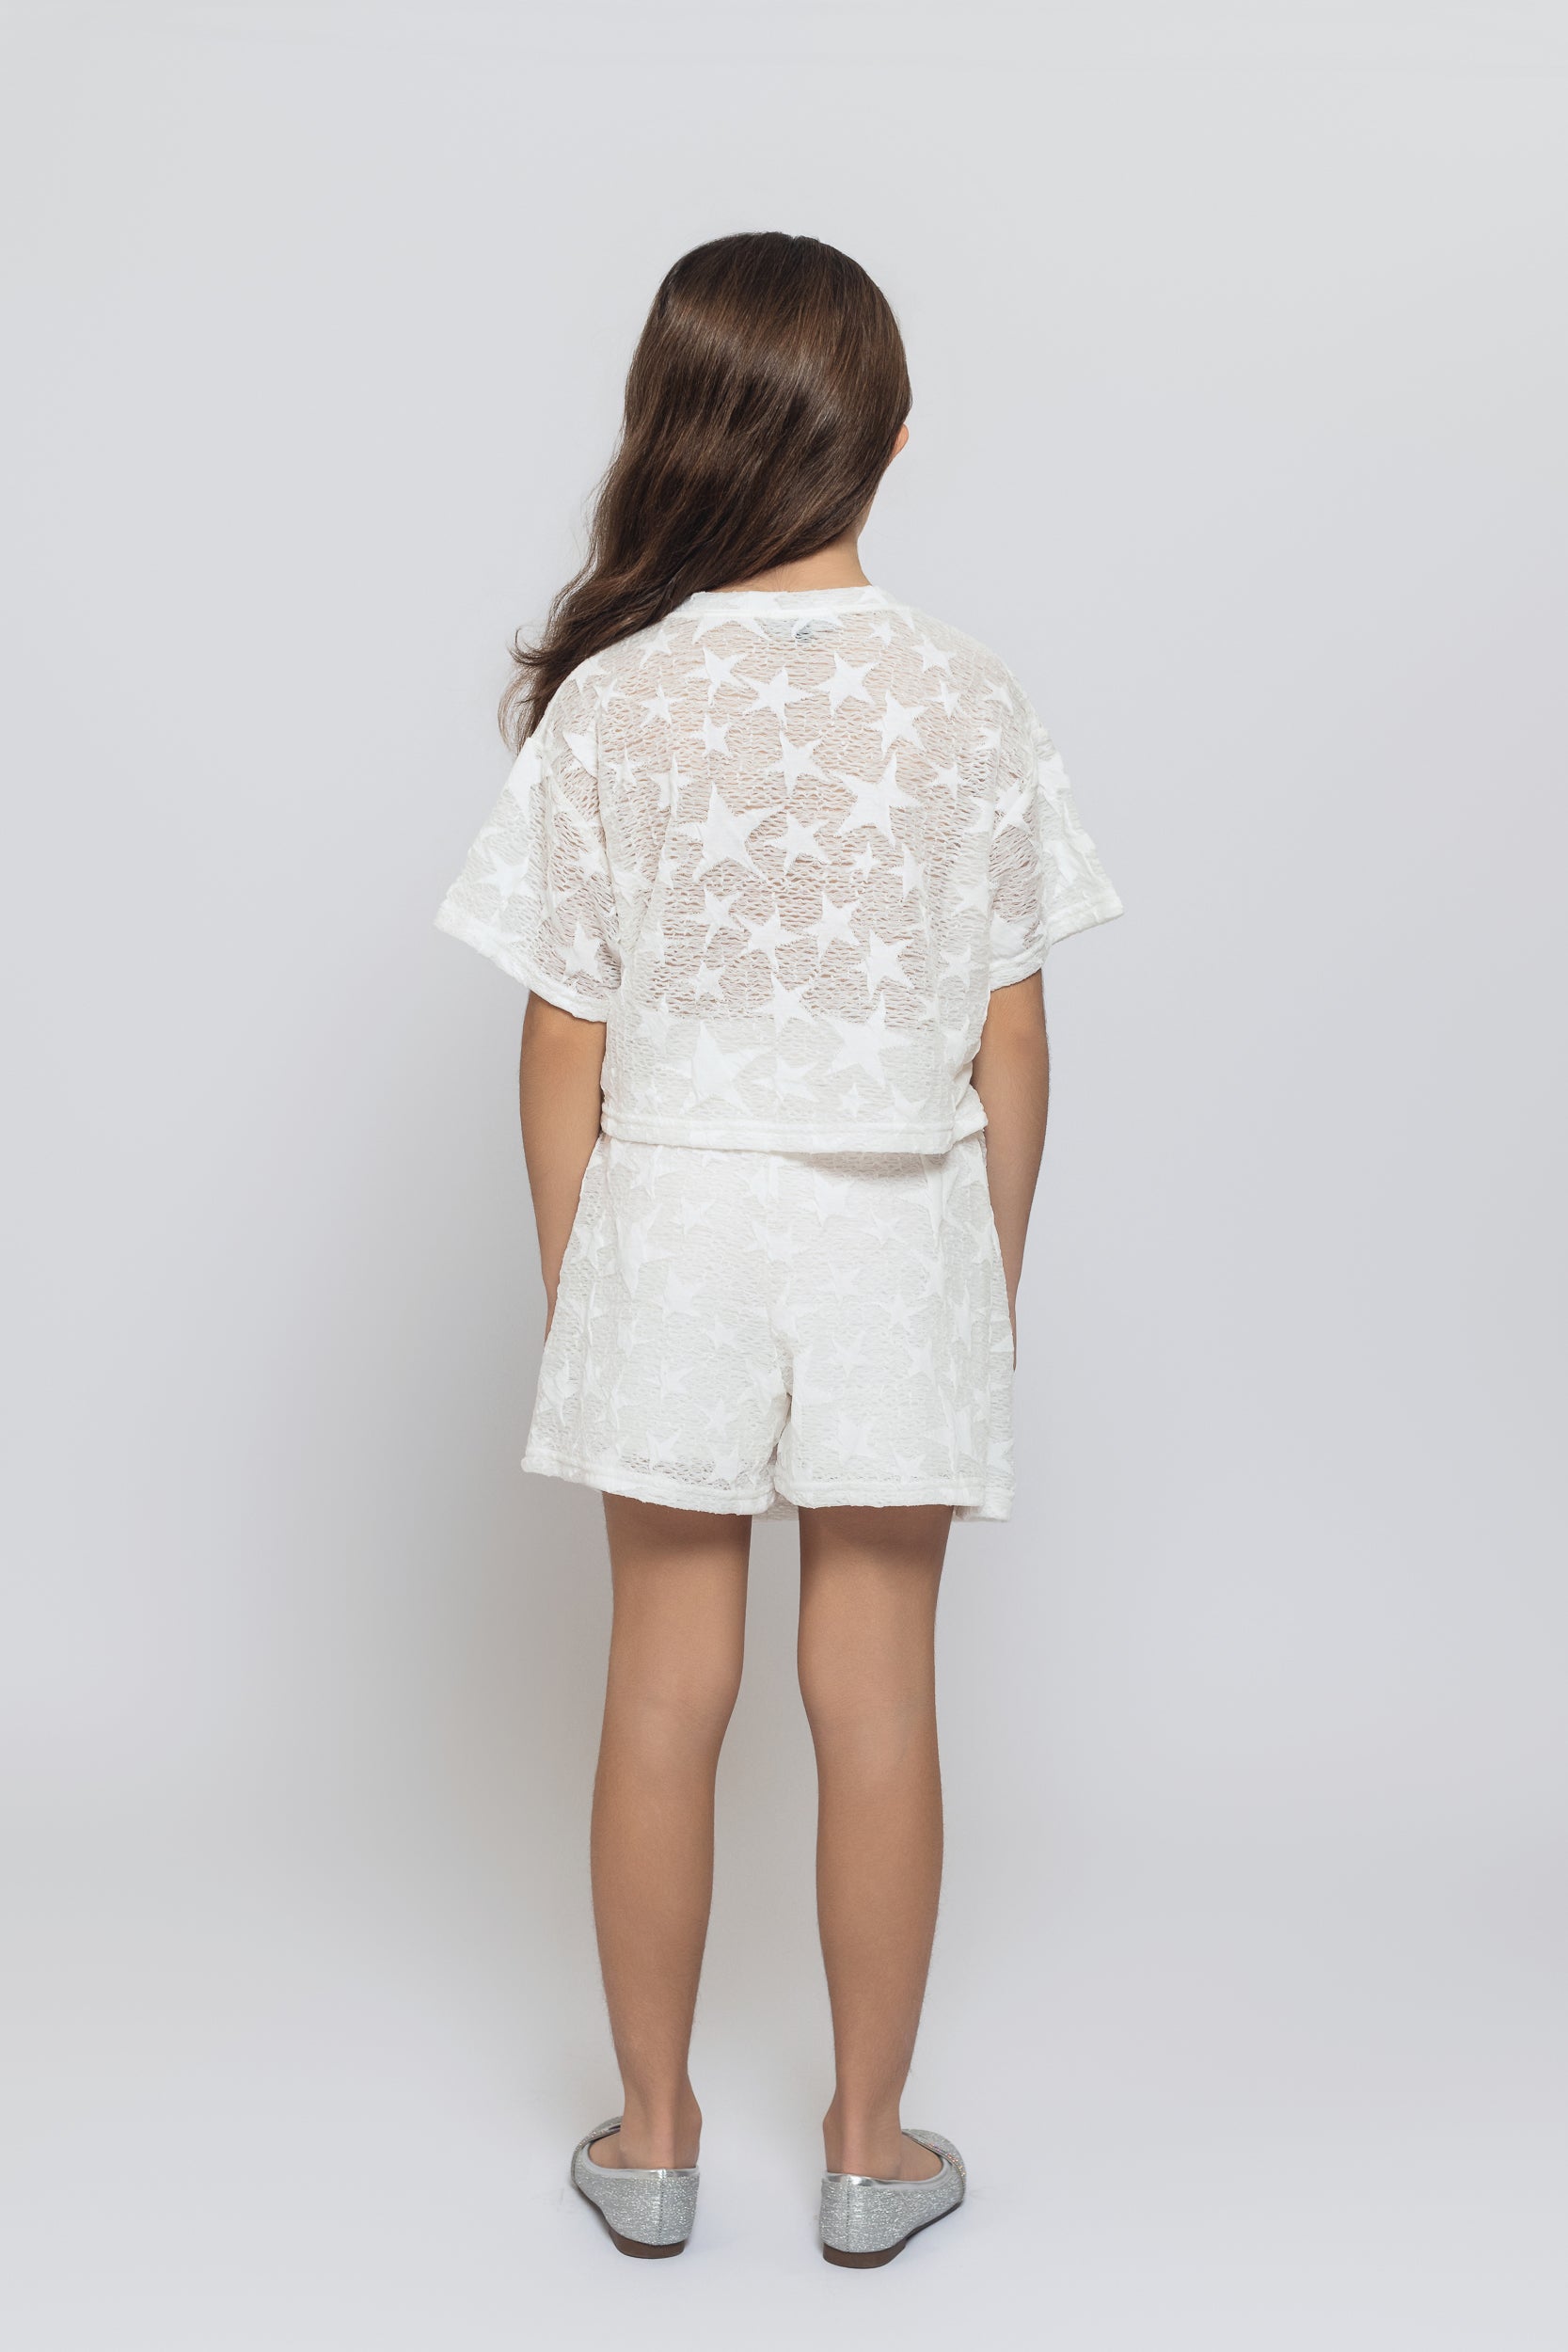 Star Top With Skirt Set For Girls - White